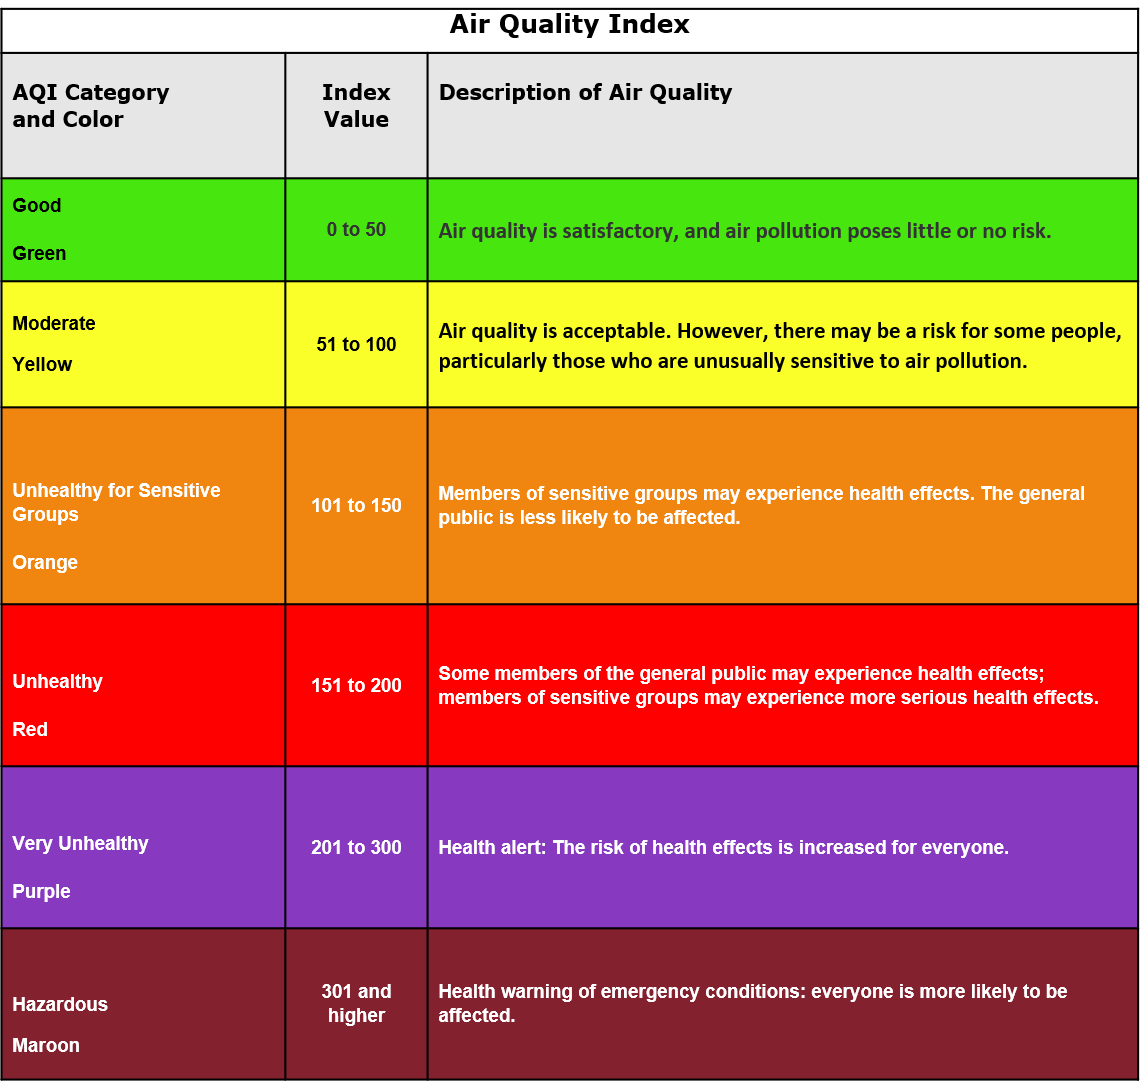 Air Quality Index Ranges from good to hazardous are color coded, Credit: EPA